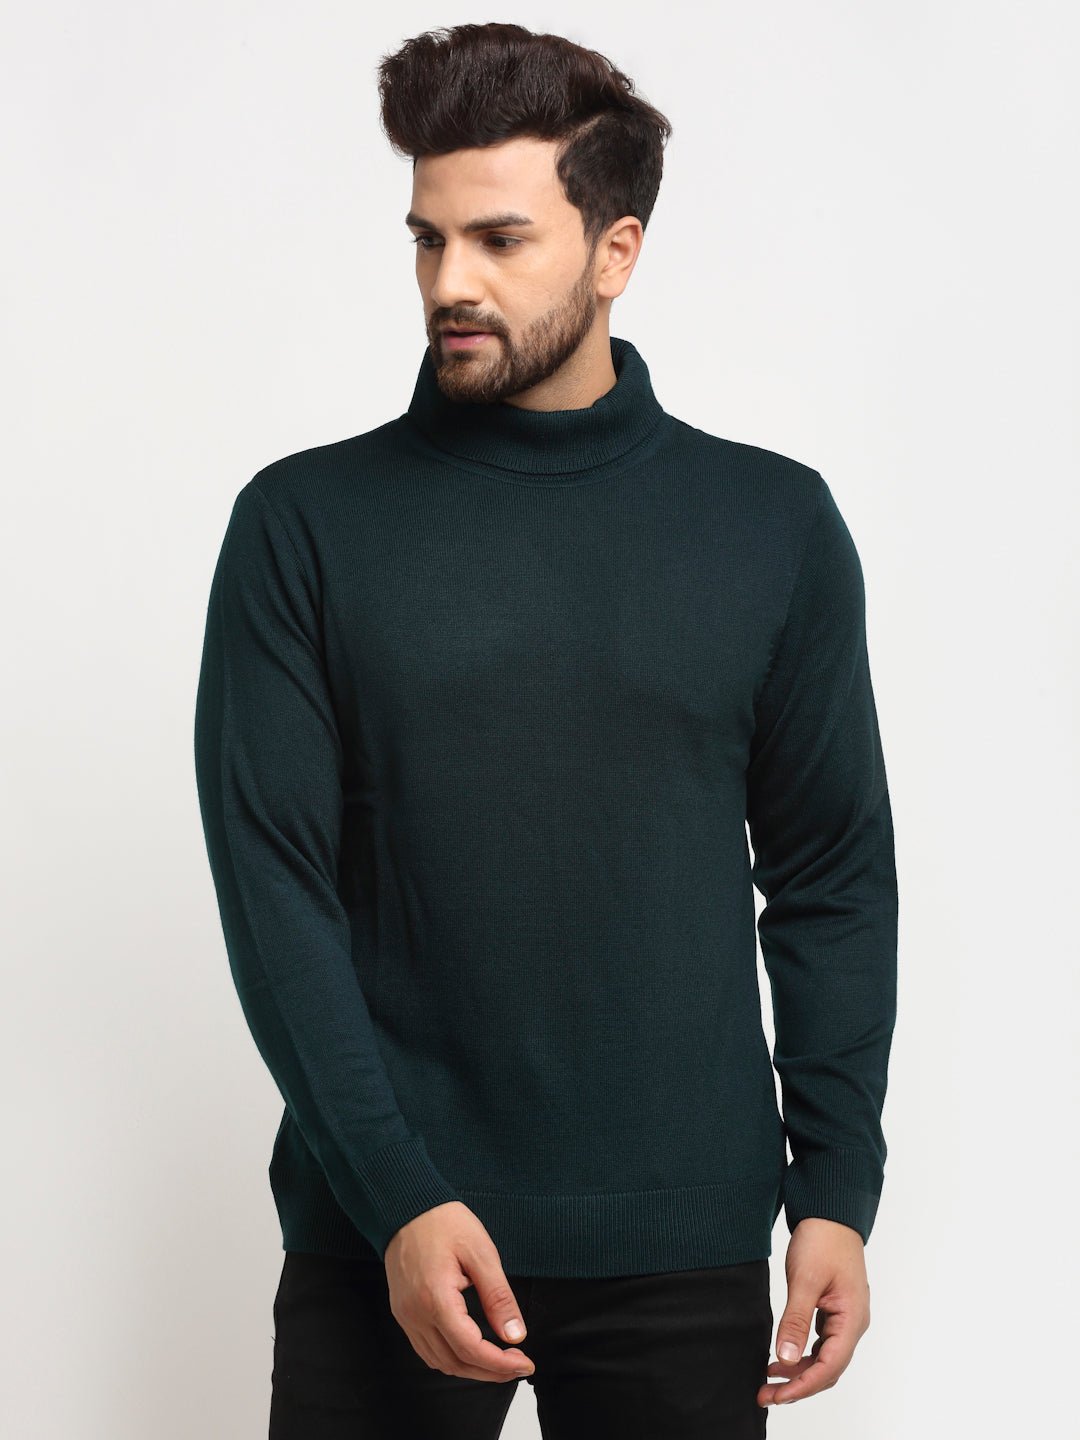 Teal Solid High Neck Sweater - clubyork